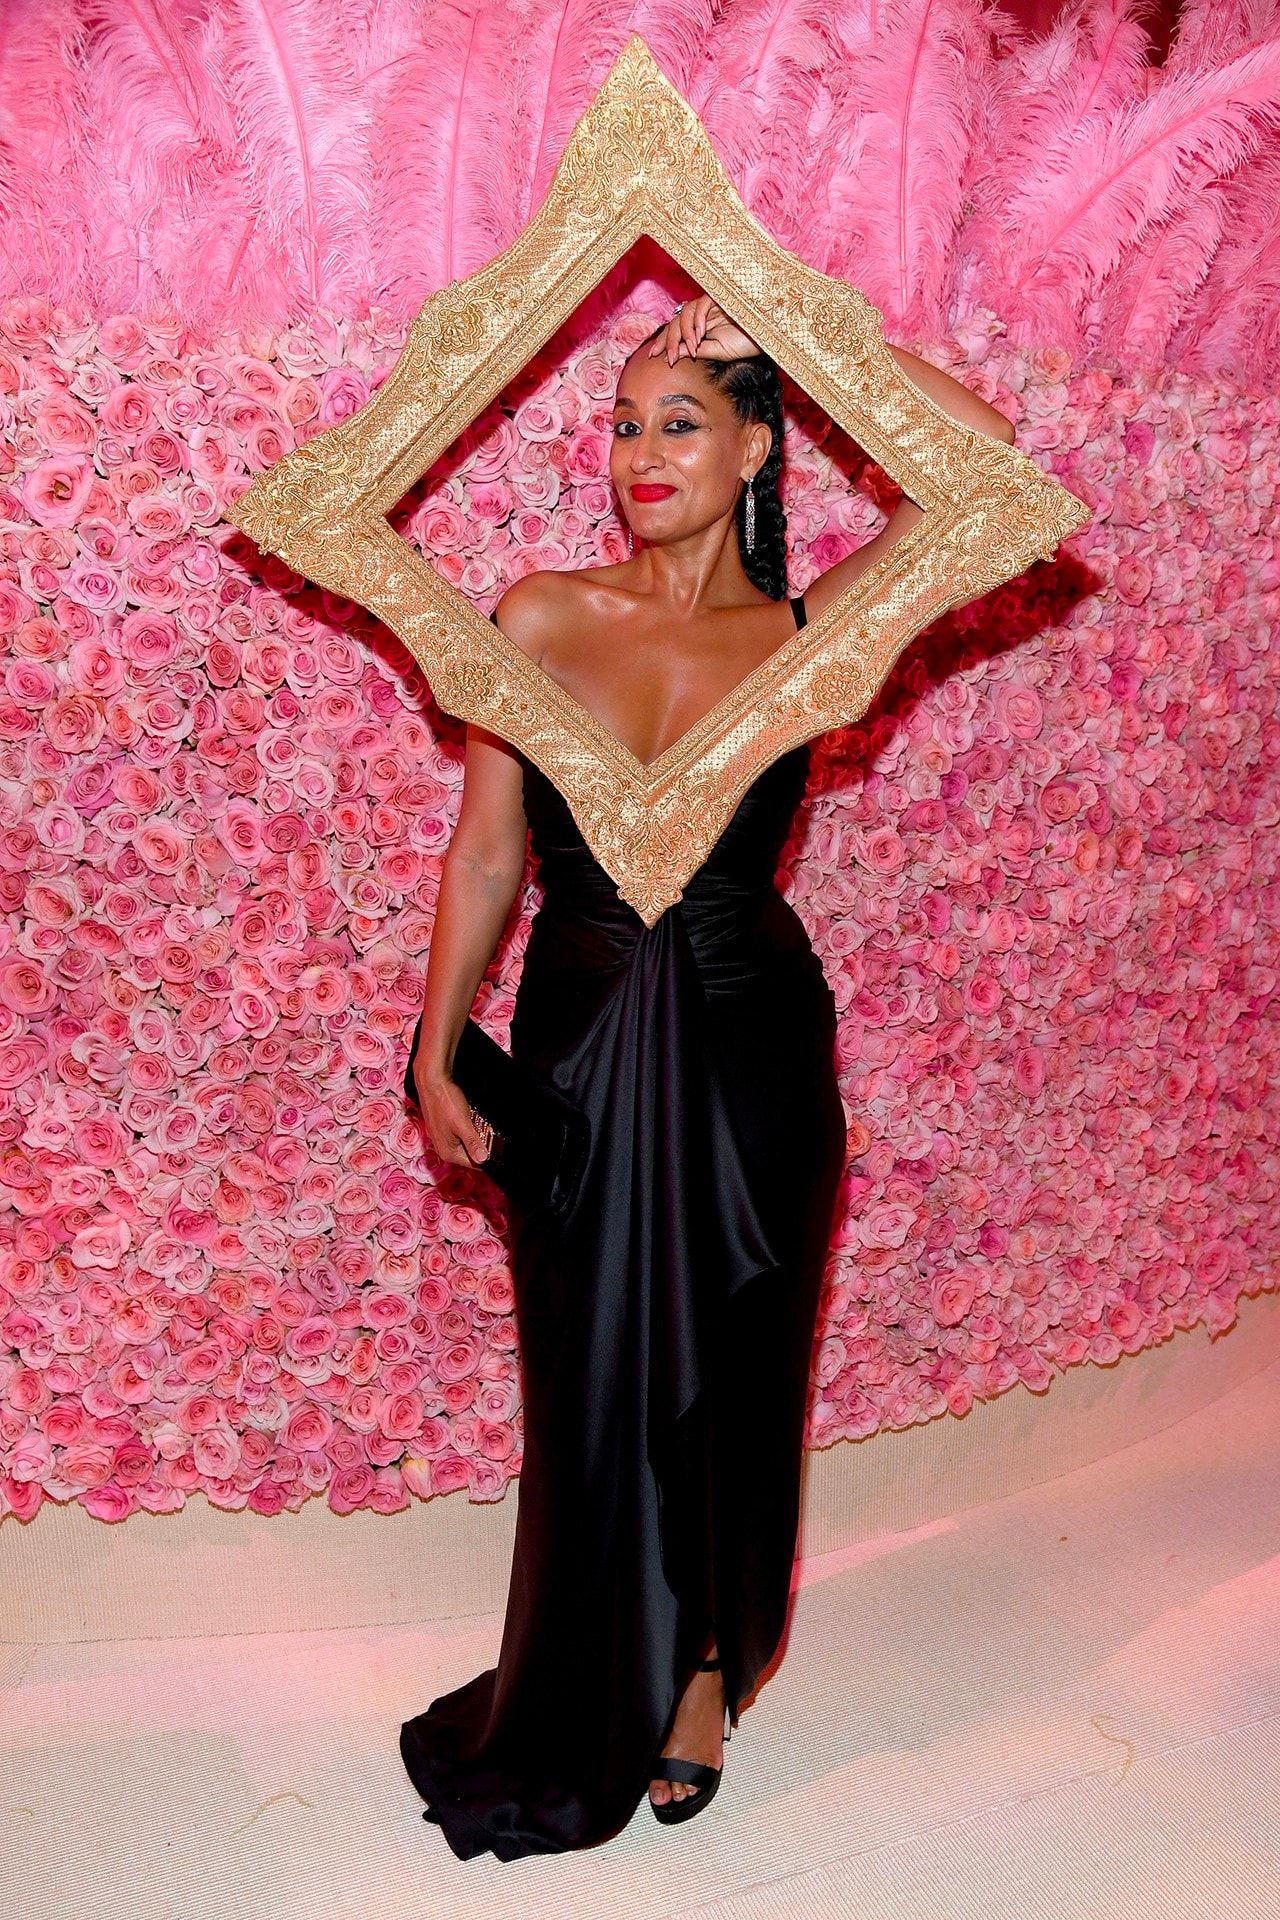 Tracee Ellis Ross Met Gala 2019 Red Carpet Camp Notes on Fashion black dress picture frame